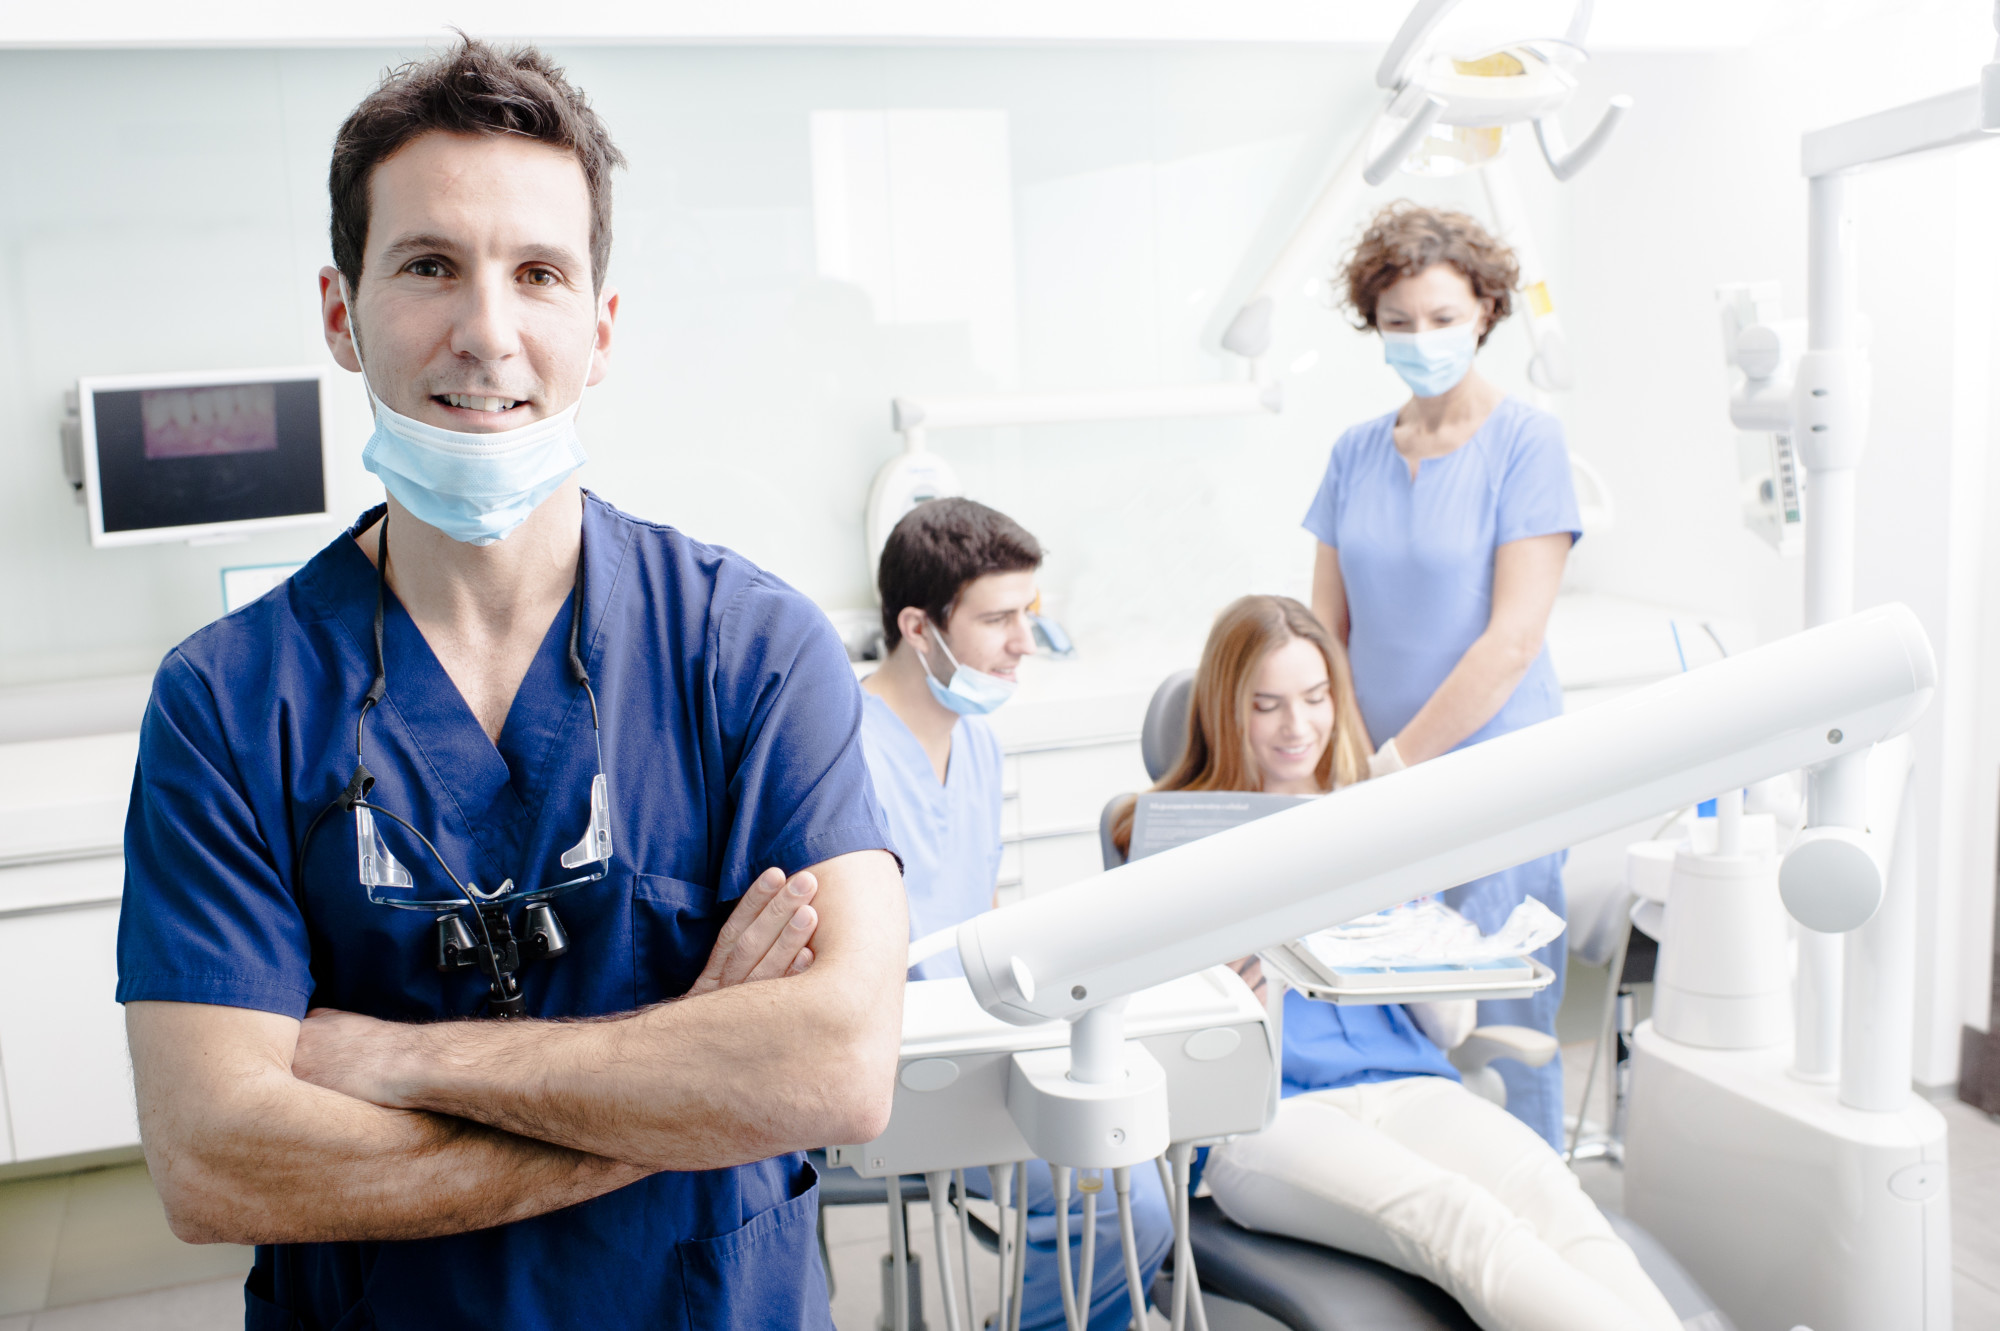 When choosing a dental office for your needs, you need to look for certain qualities in a dental team. Learn what they are here.